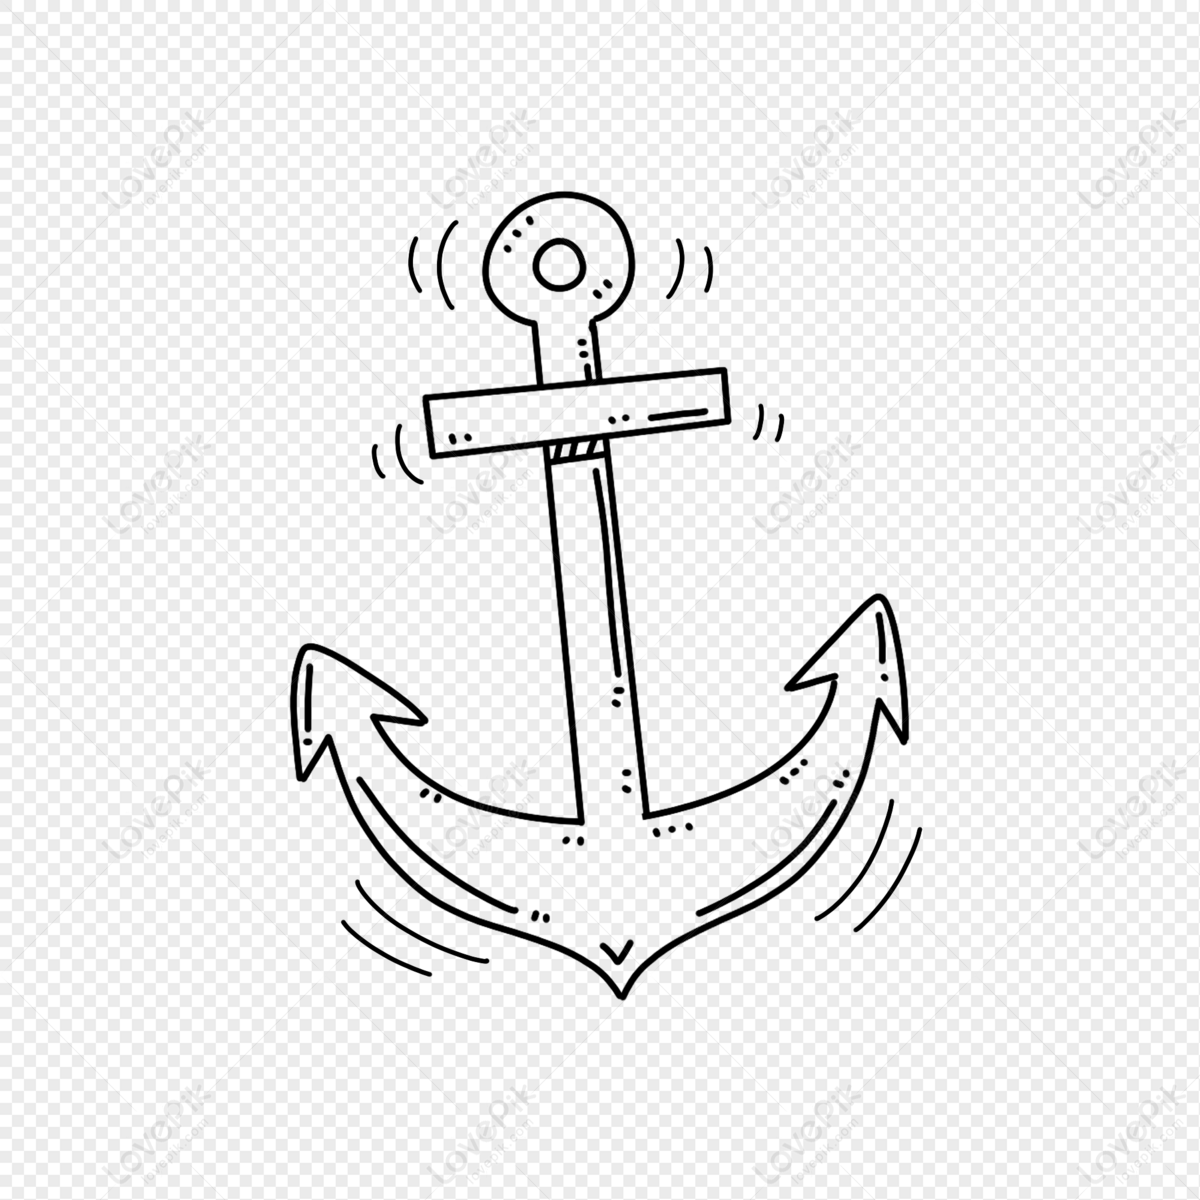 Anchor Stick Figure, Black And White, Anchor, Line PNG Transparent